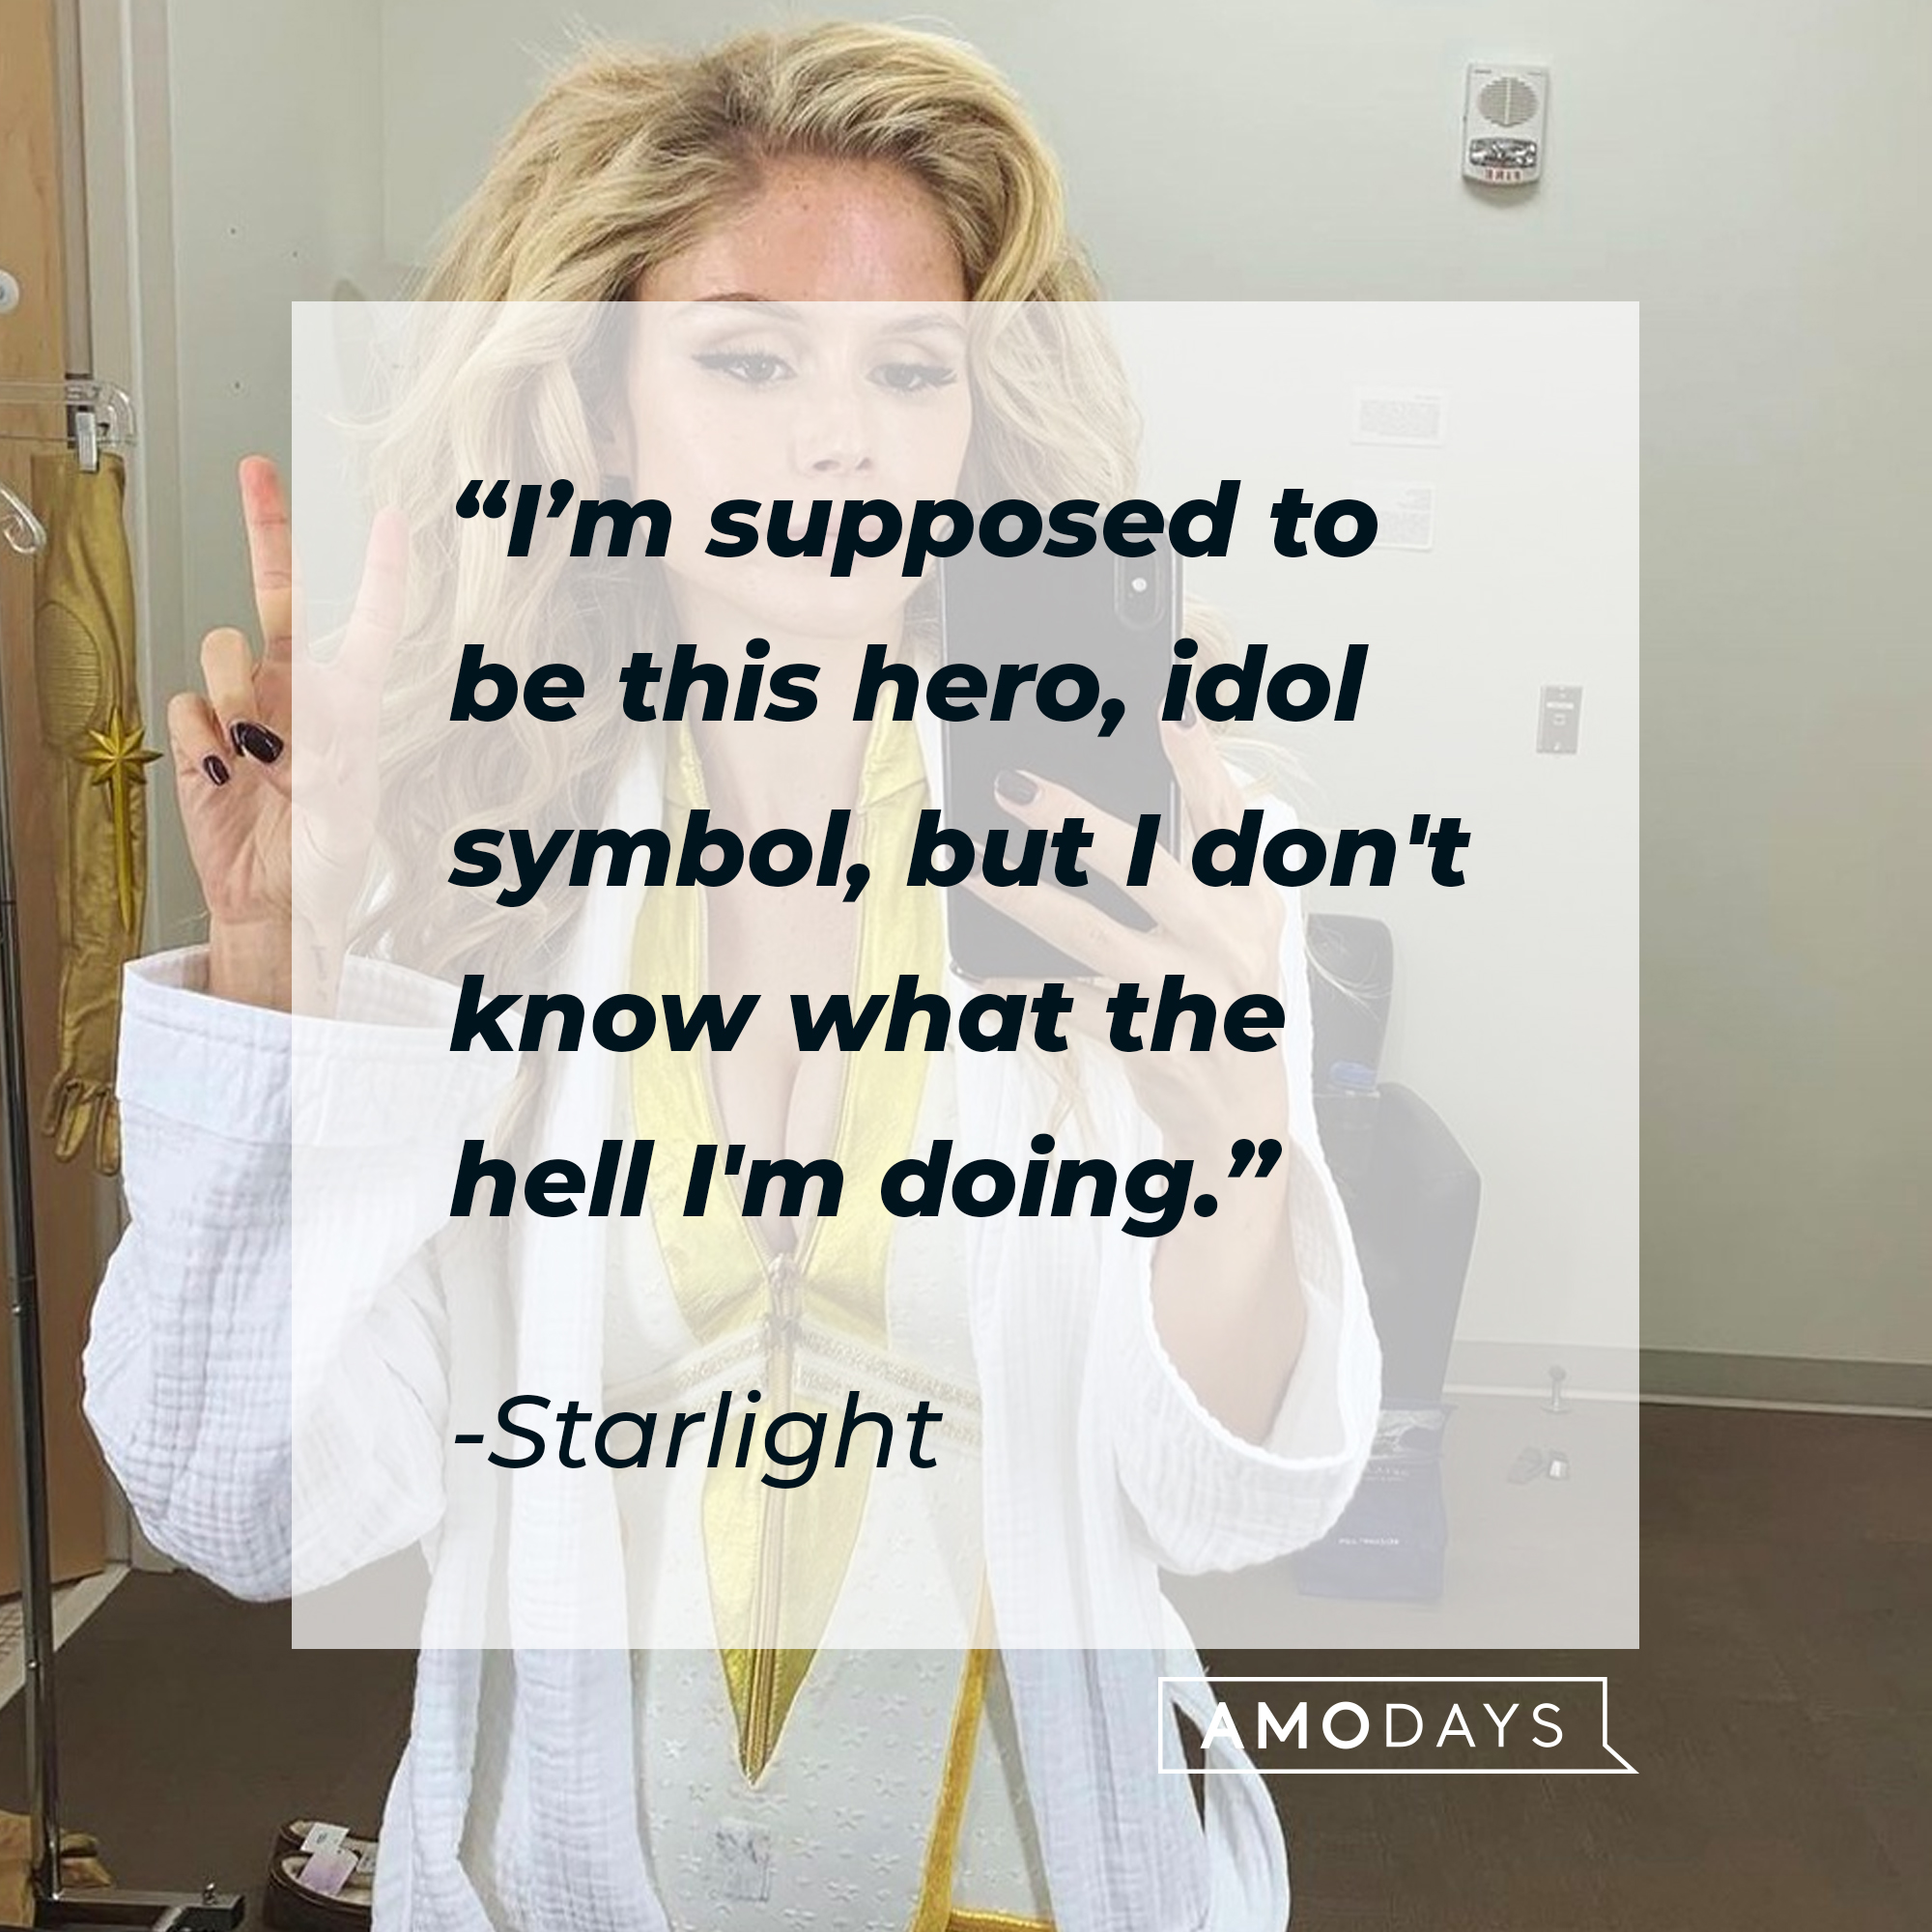 Starlight, with  her quote: “I’m supposed to be this hero, idol symbol, but I don't know what the hell I'm doing.” | Source: facebook.com/TheBoysTV